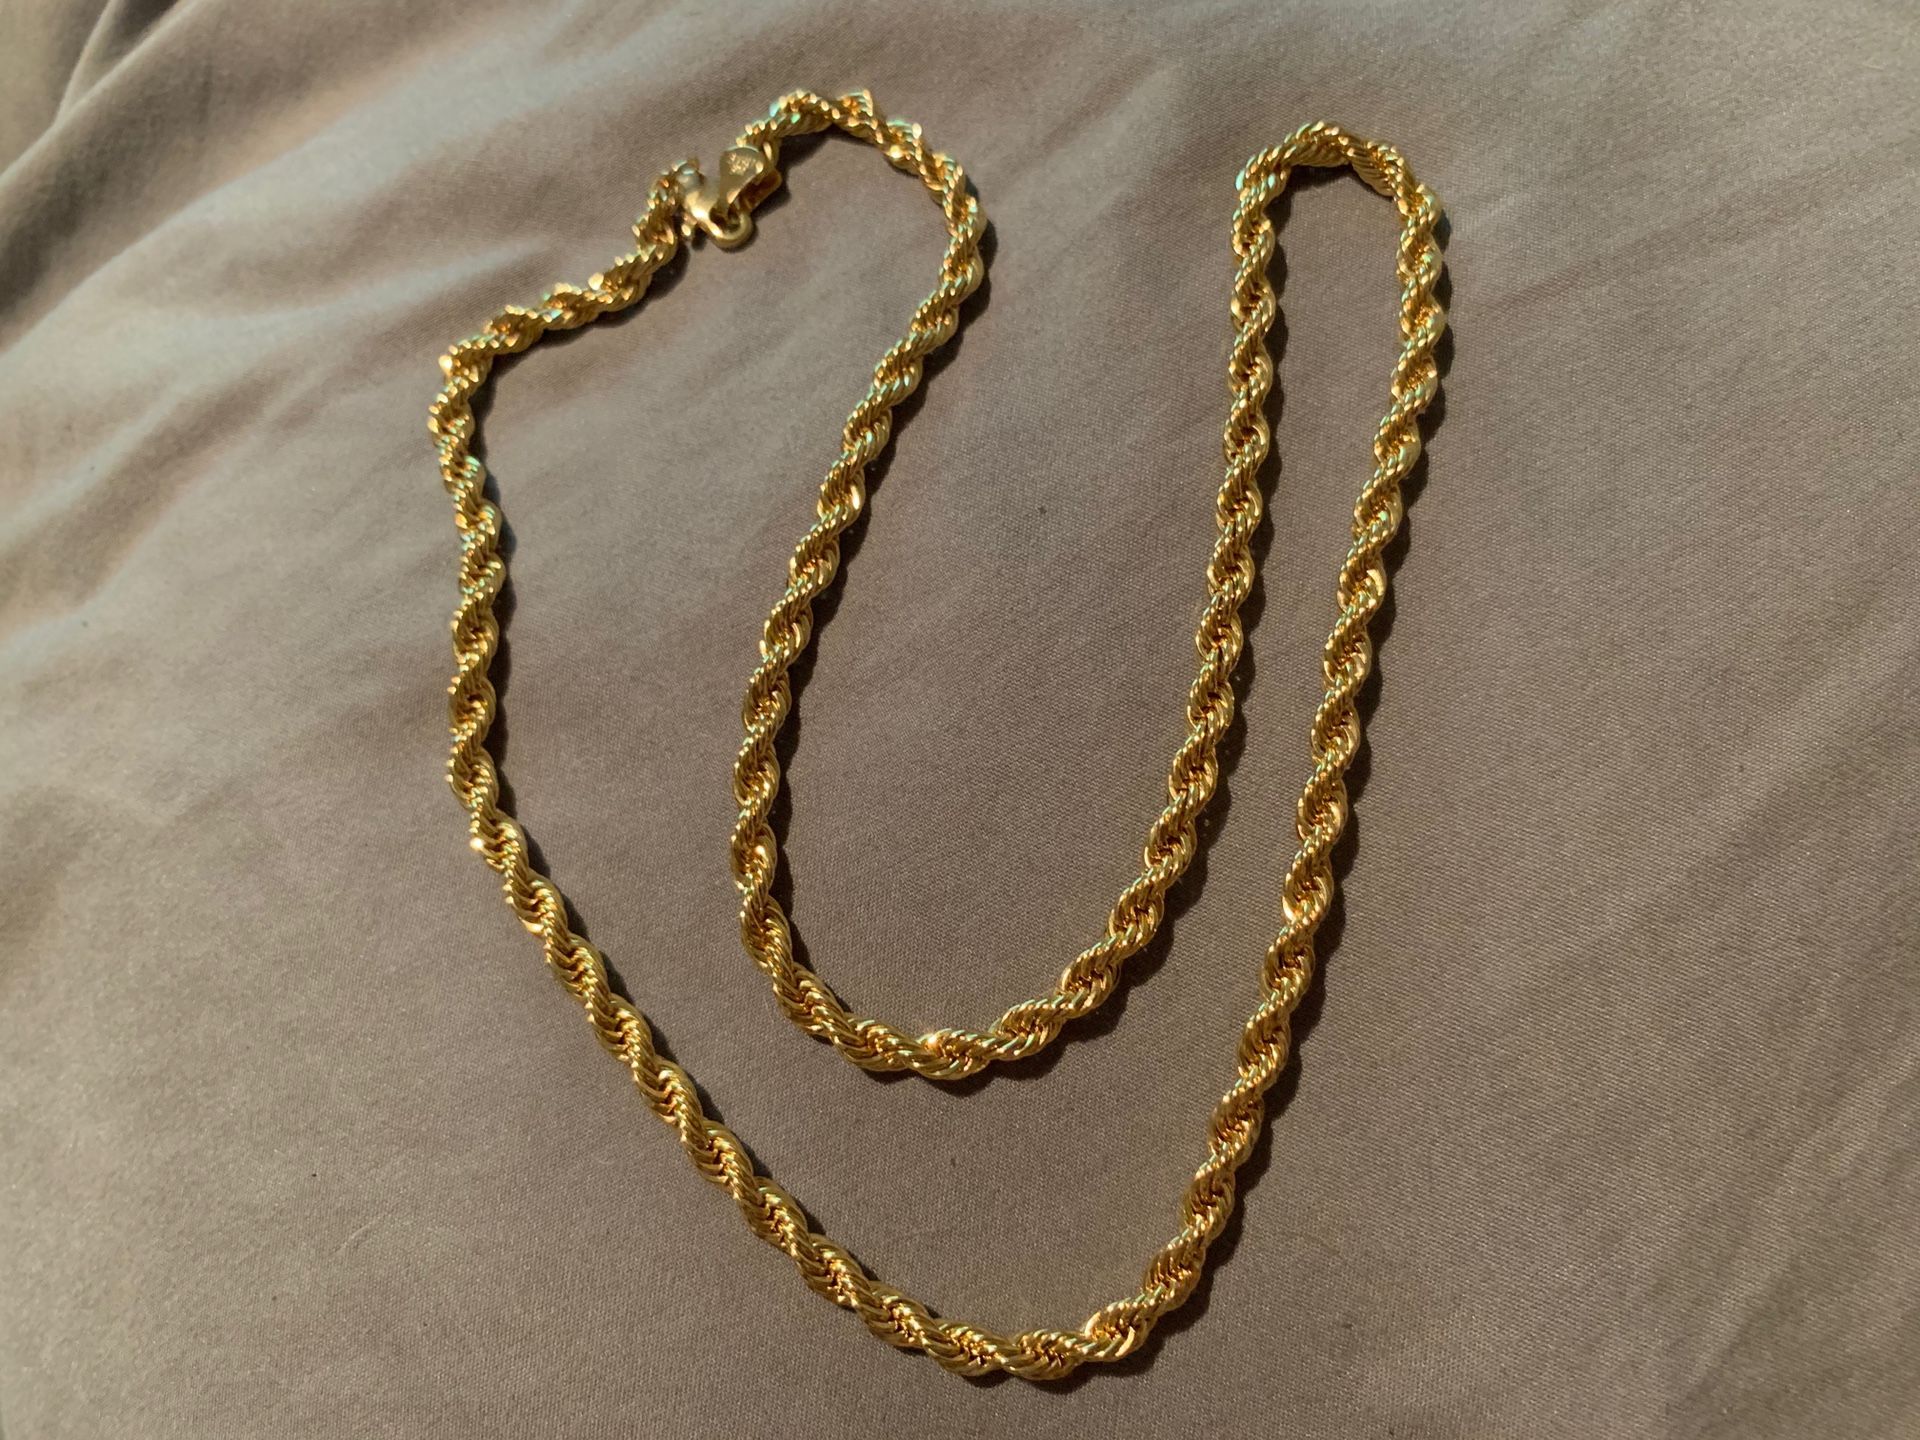 Real Gold 14k rope chain 24 length 4.5mm